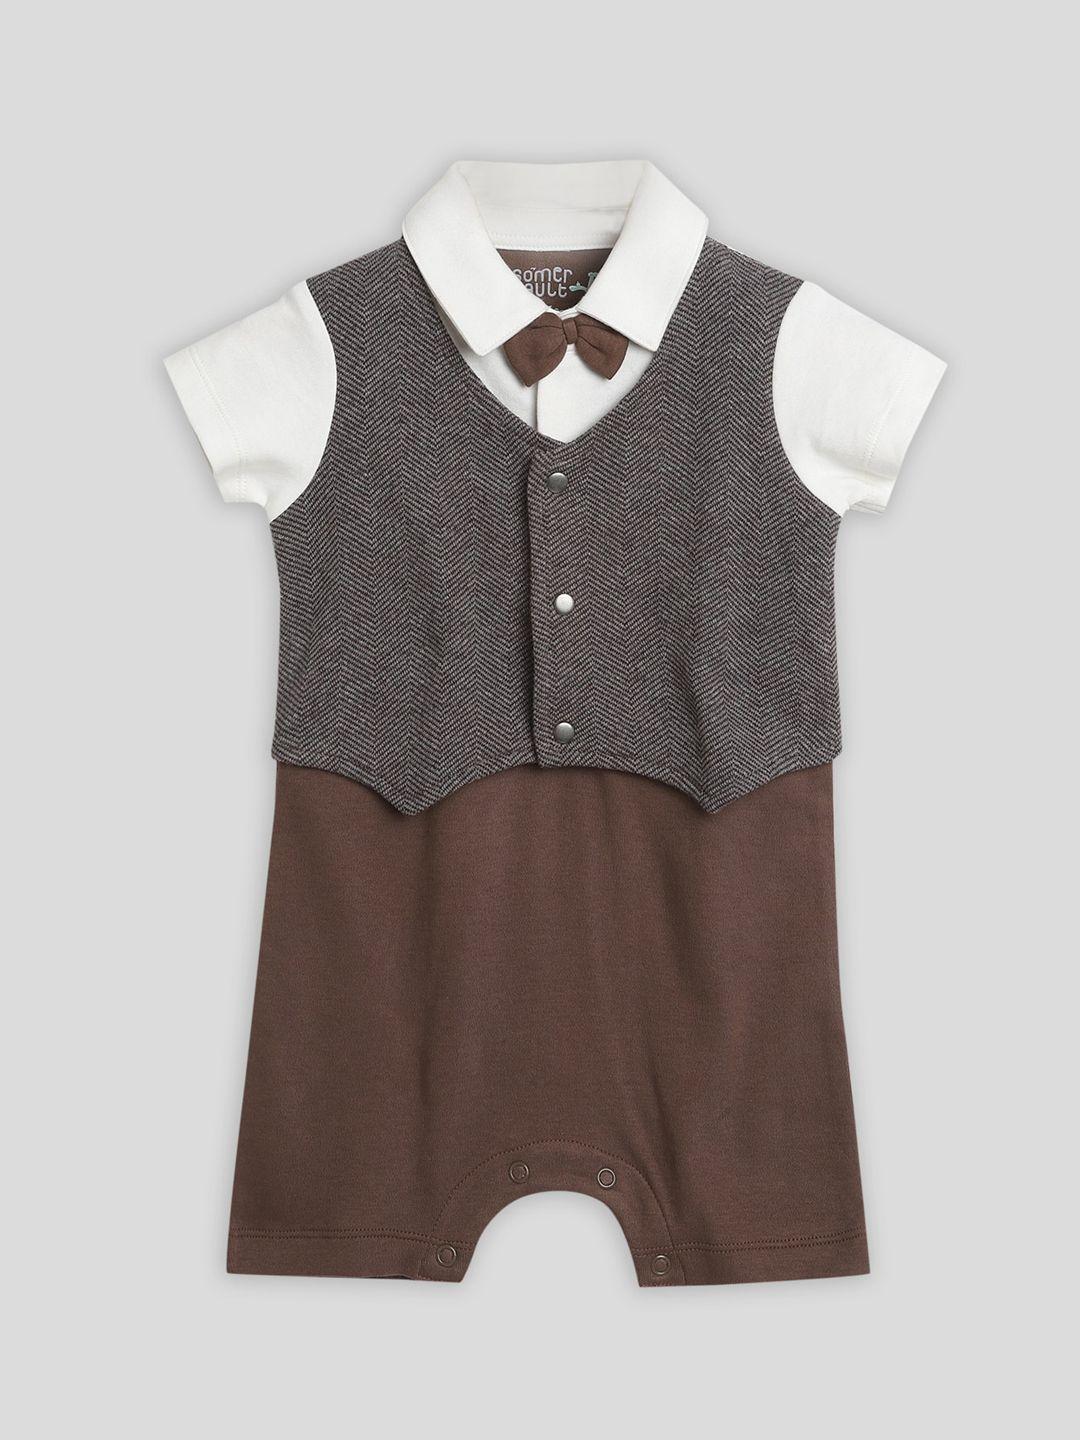 somersault-infants-boys-cotton-romper-with-bow